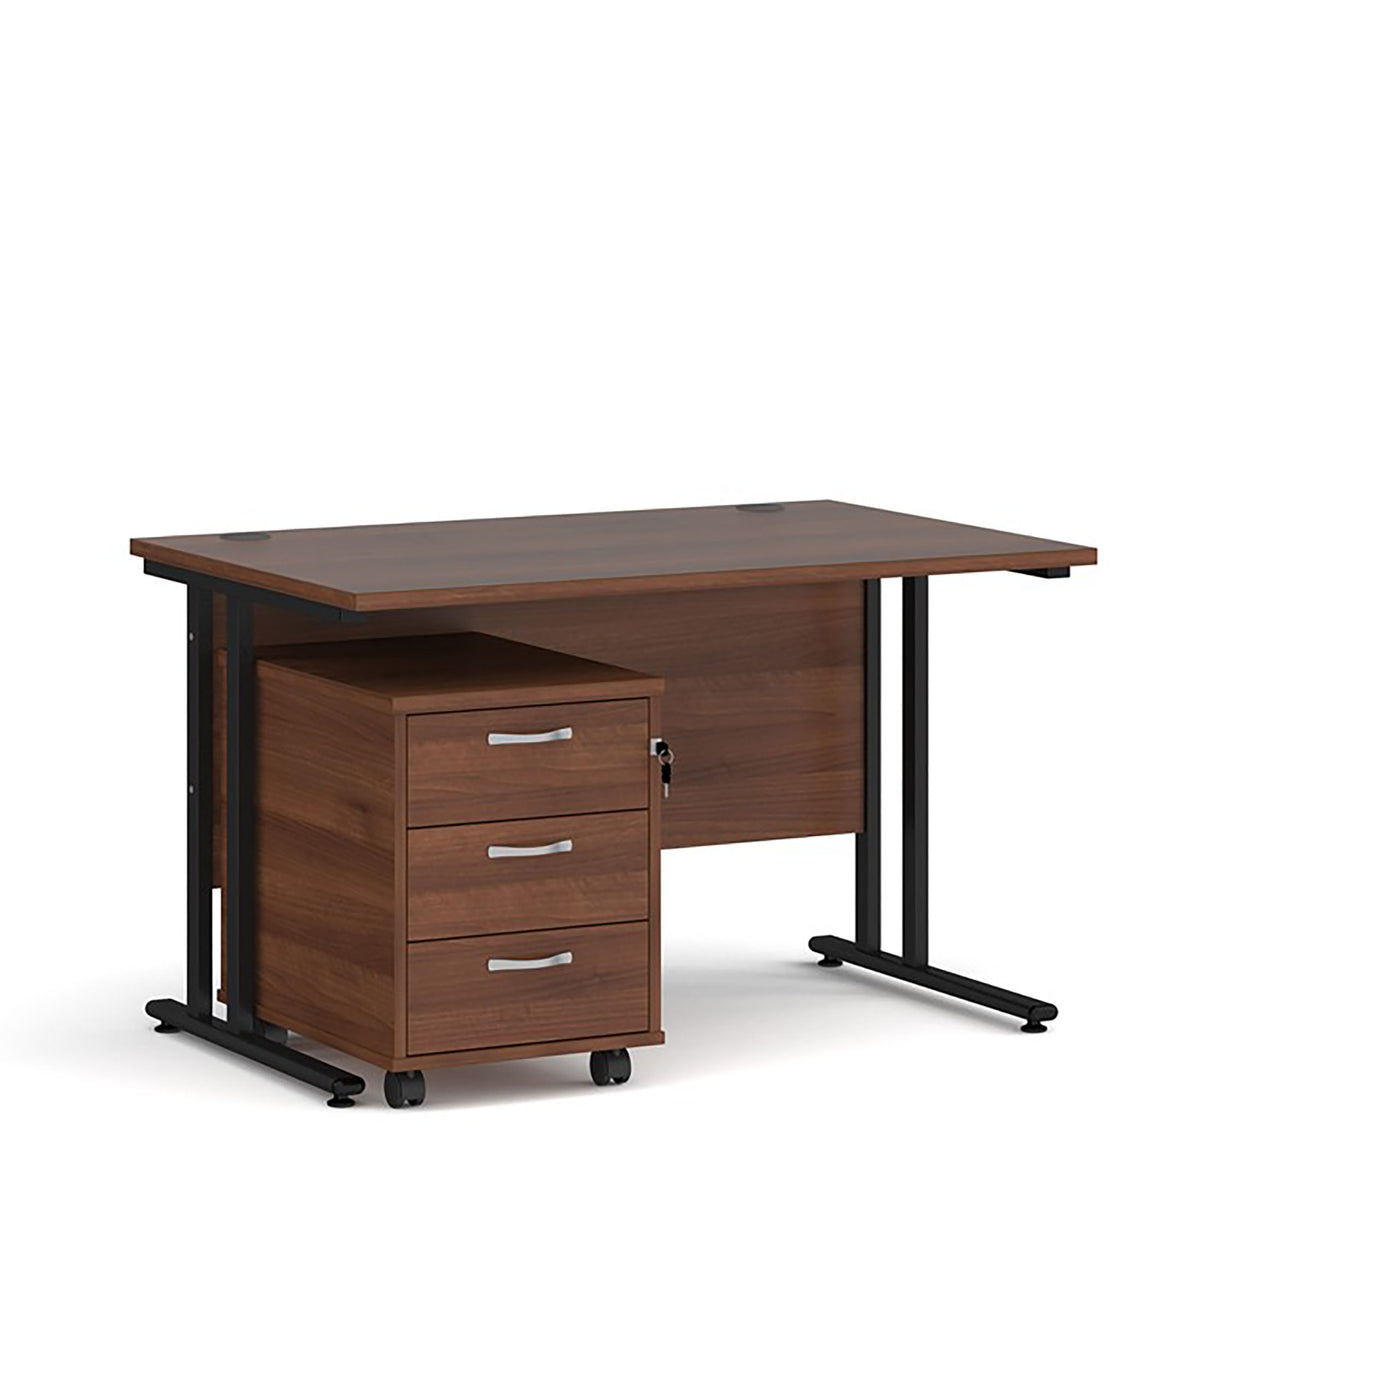 Maestro 25 with 3 Drawer Pedestal | Home Office Desk with Storage | Work From Home | Home Office Furniture | Desk with Storage